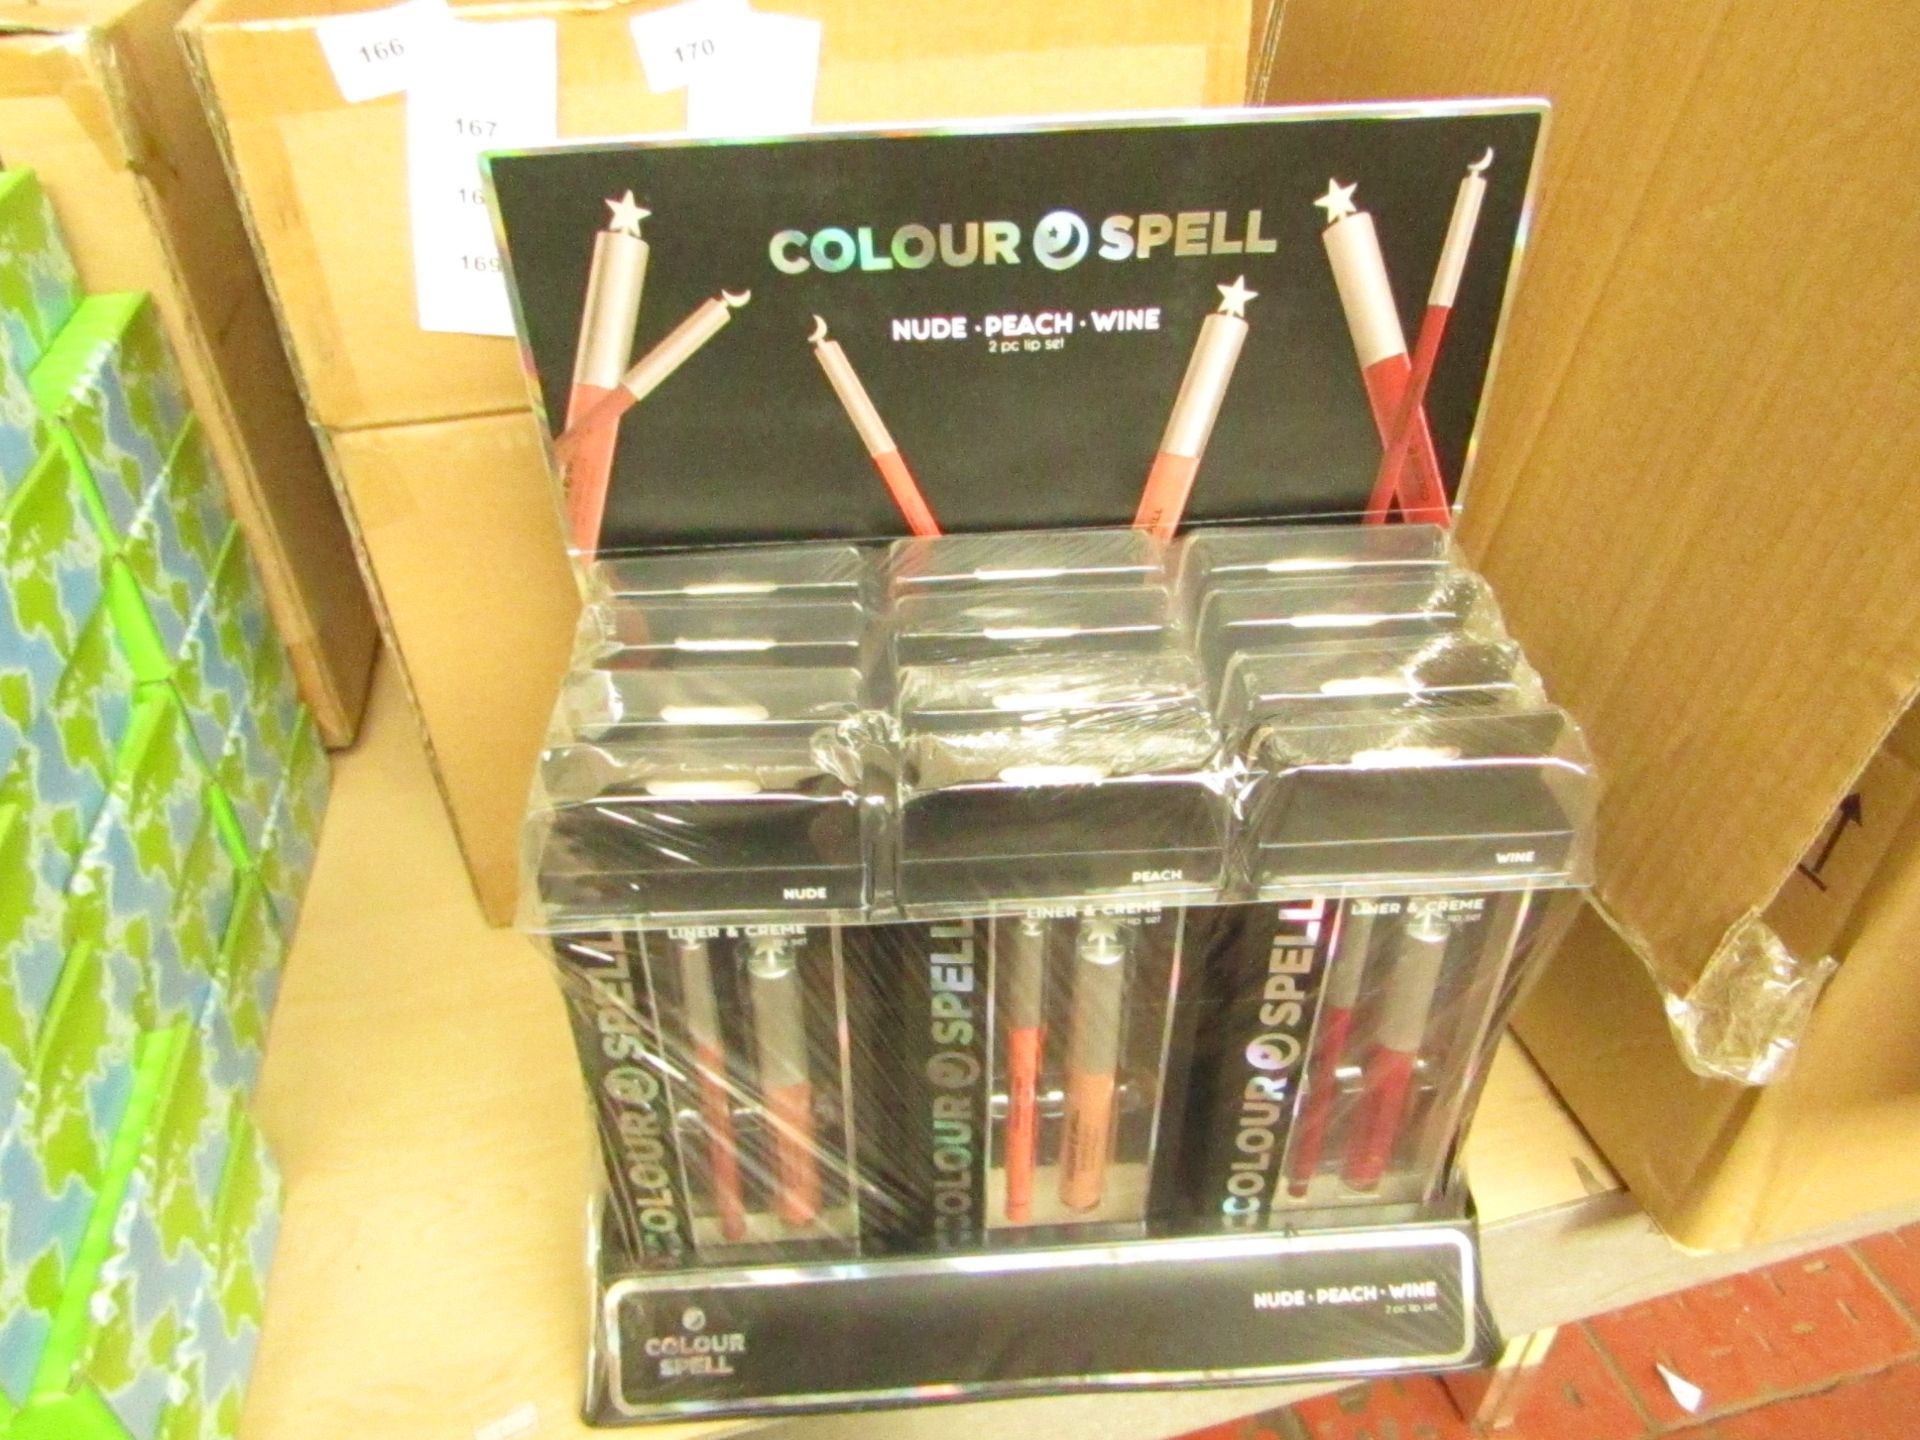 12 Packs of 2 Colour Spell Lip Sets. Nude, Peach & Wine Colours. New and Boxed